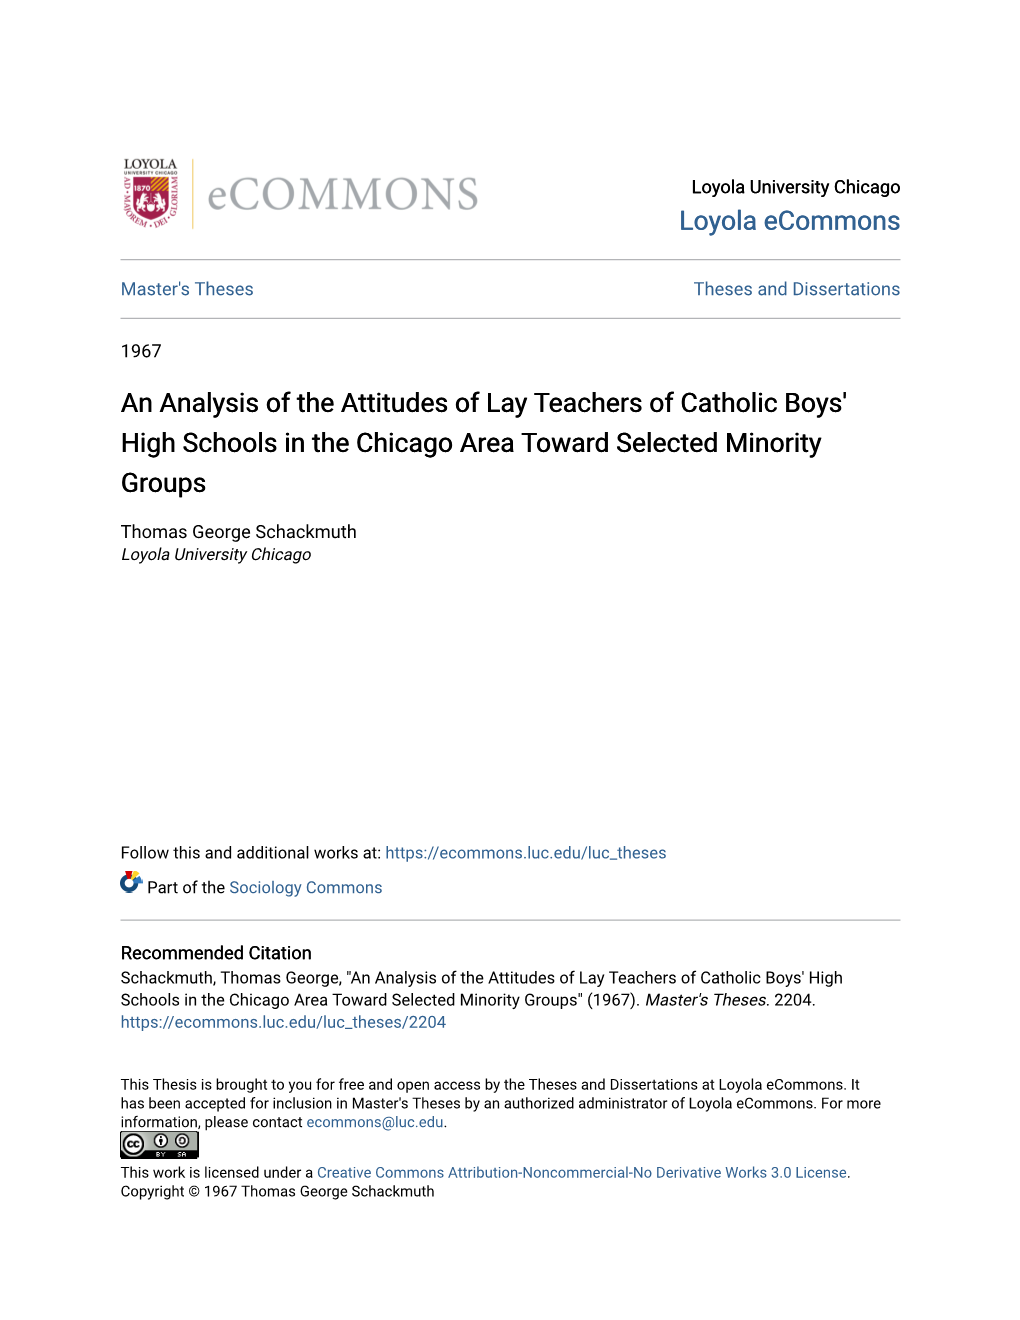 An Analysis of the Attitudes of Lay Teachers of Catholic Boys' High Schools in the Chicago Area Toward Selected Minority Groups